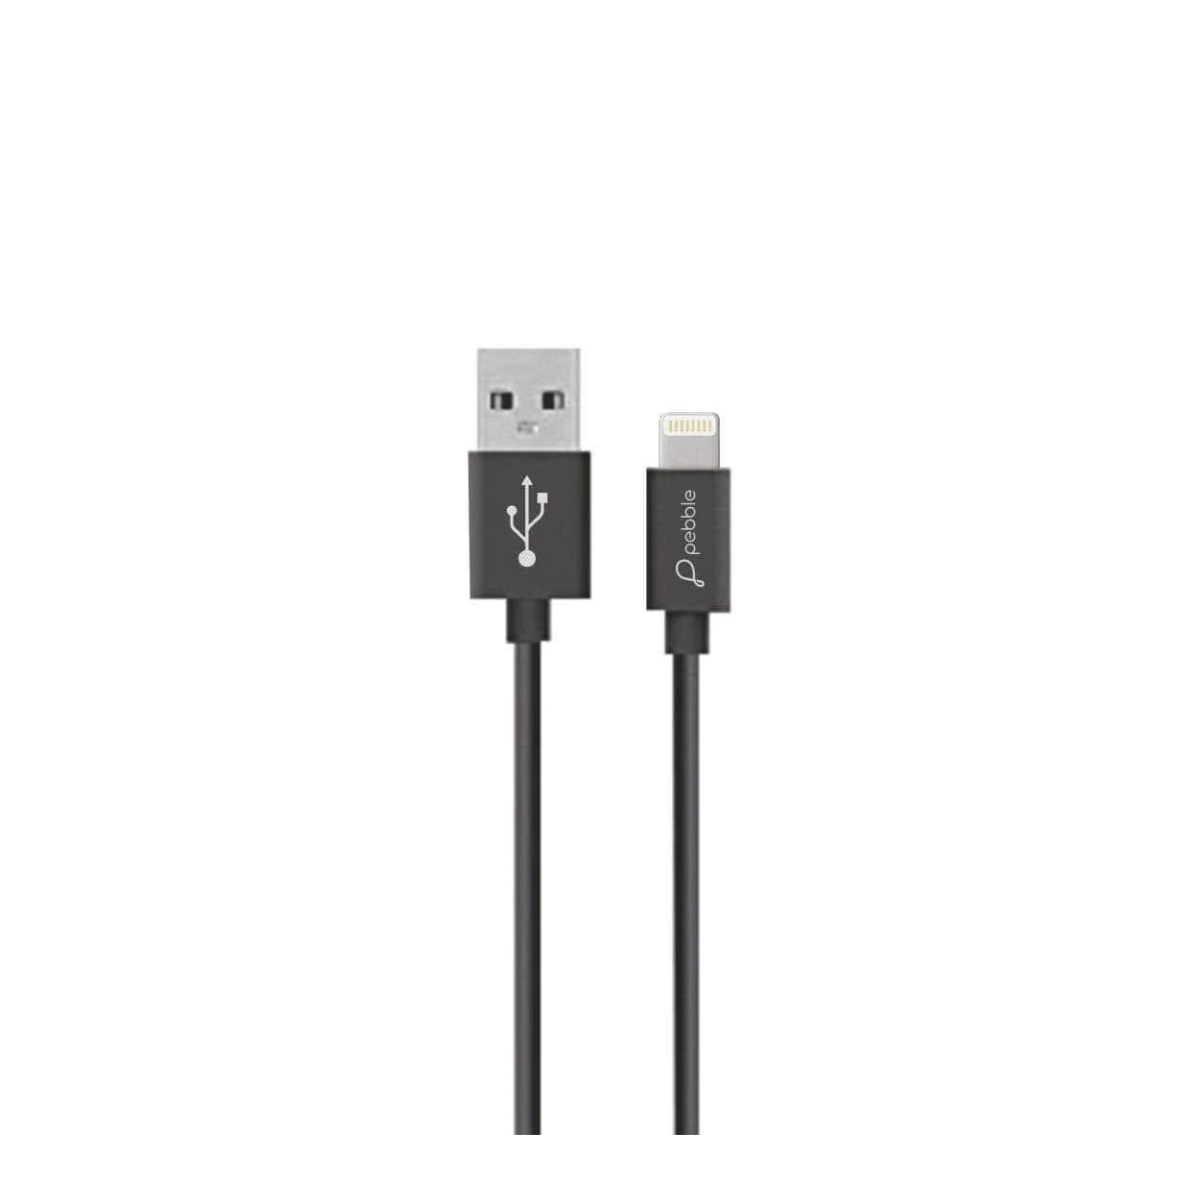 Pebble Fast Charging USB Cable PBCL10 - Lightning Charge And Sync Cable 2.4A - Black